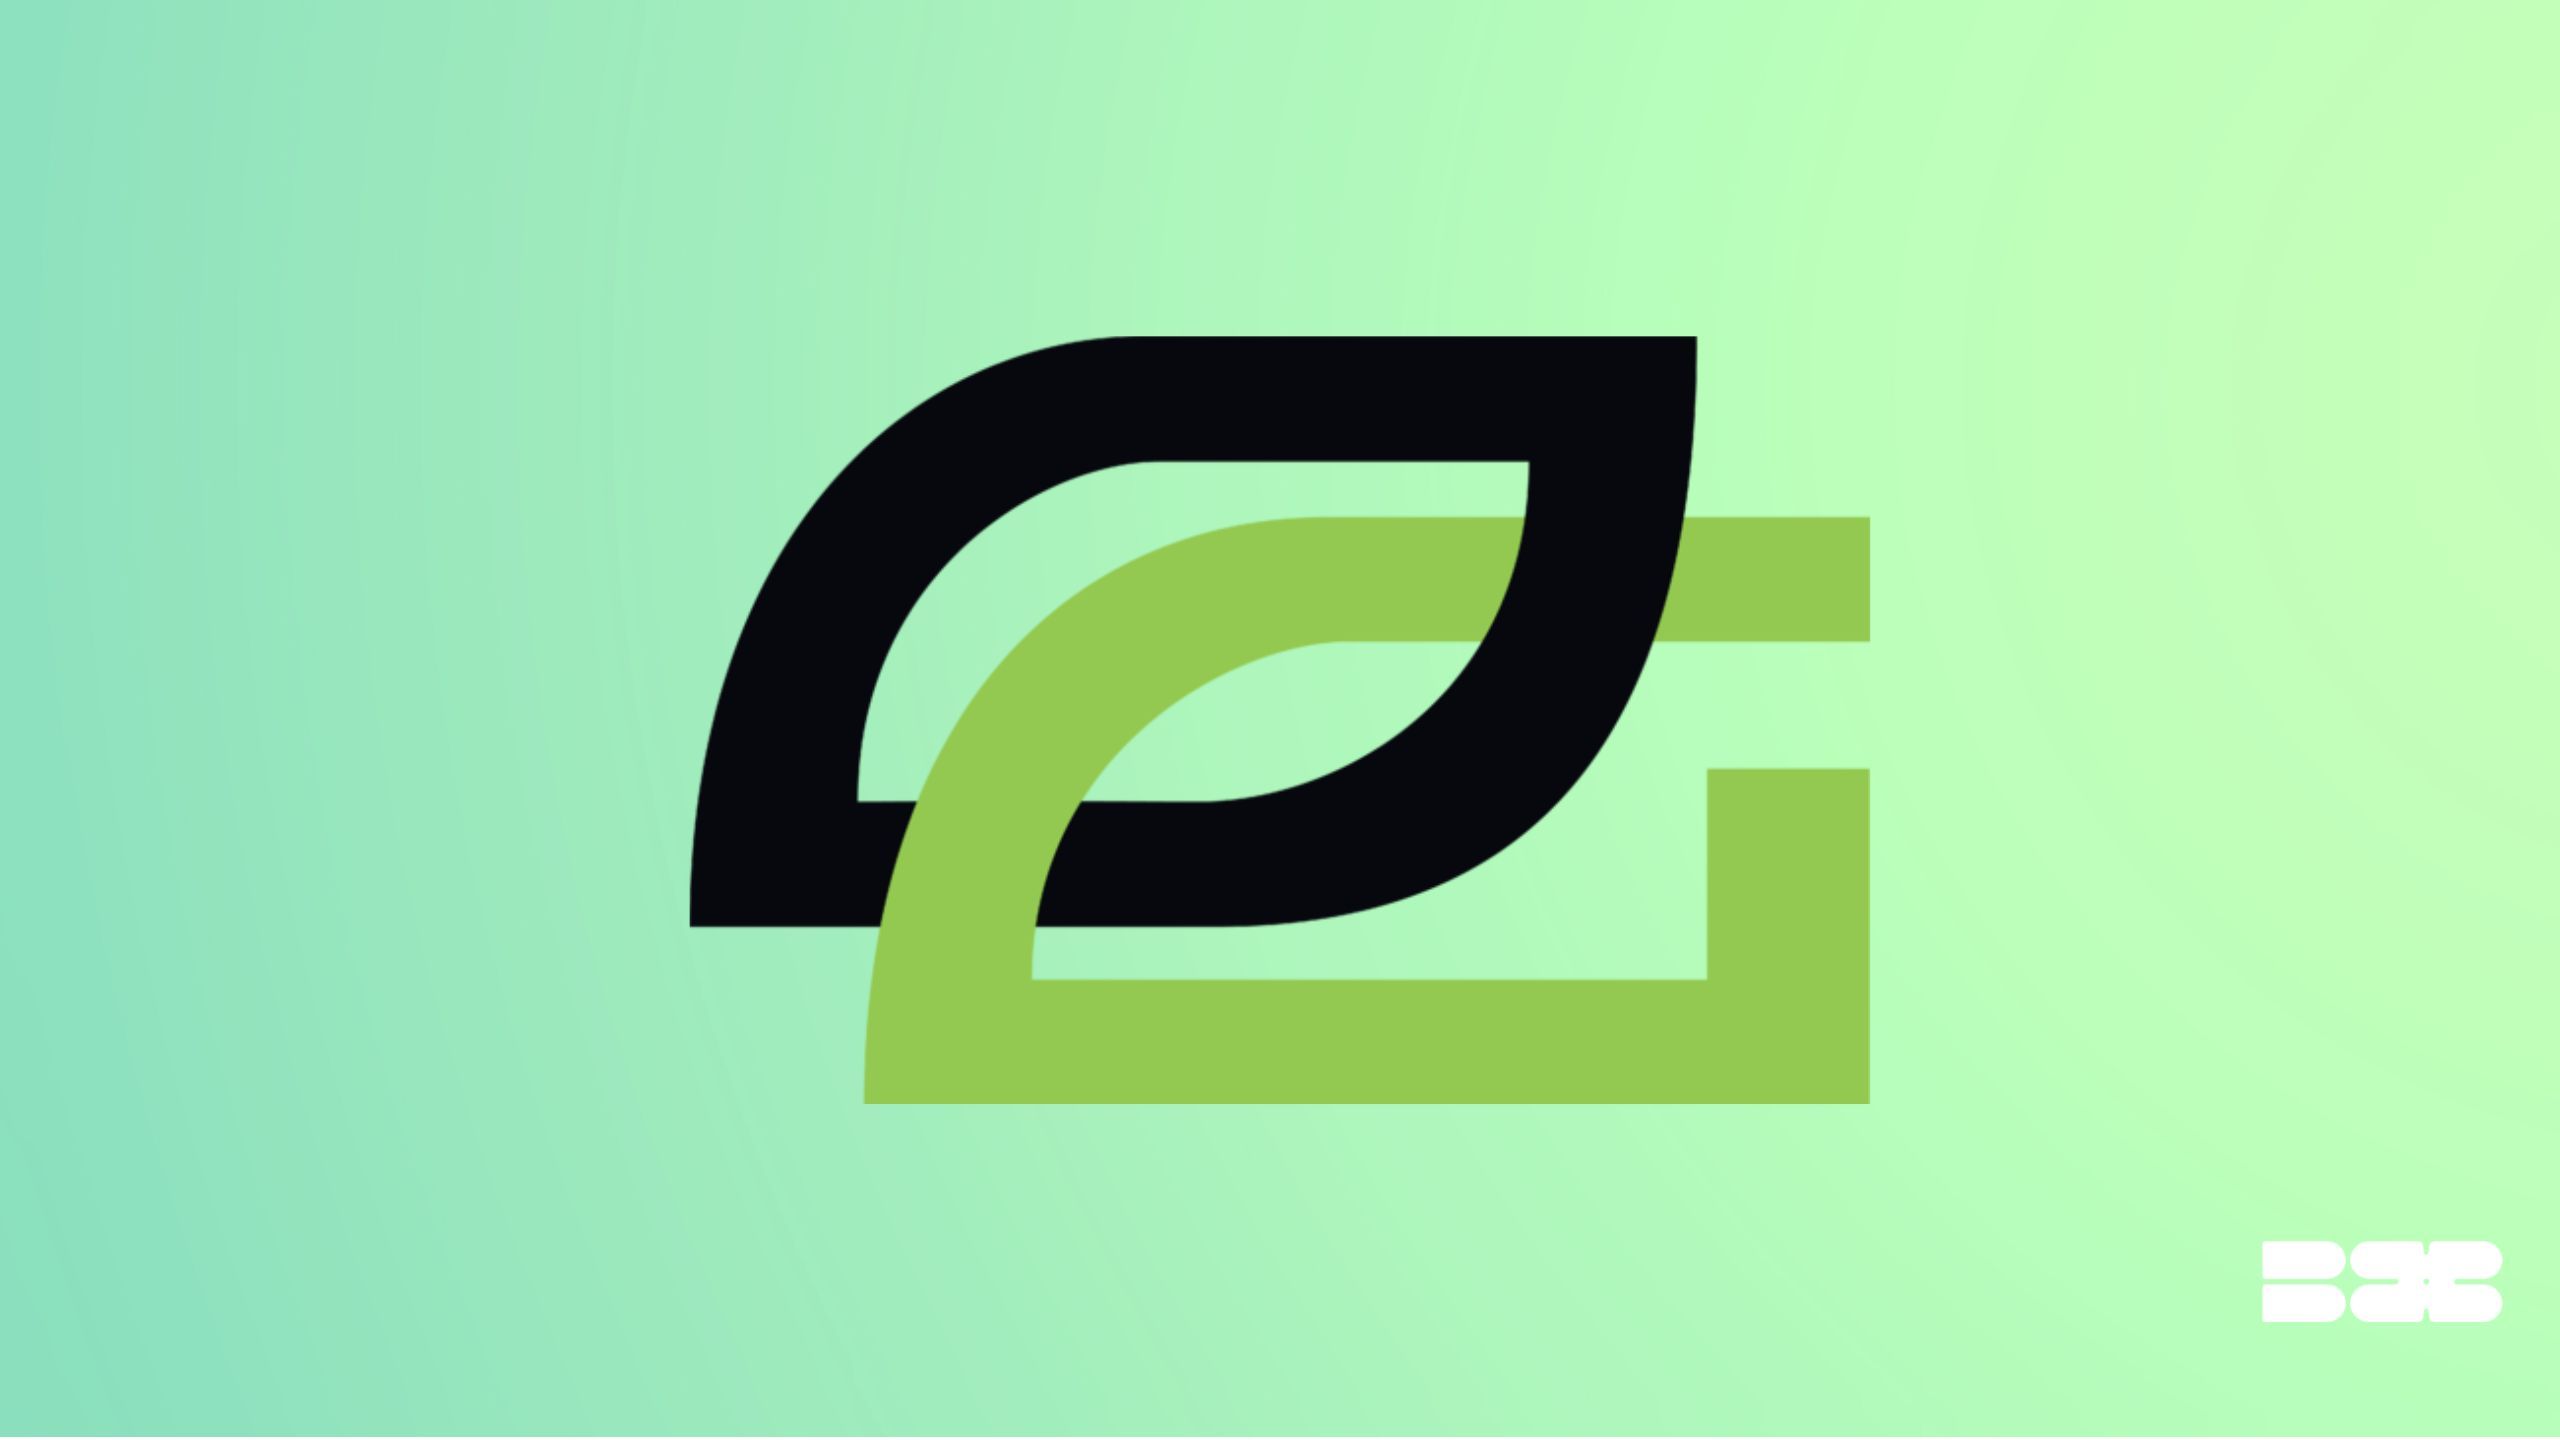 OpTic Texas now have the 2nd youngest squad (21.75 avg) in the